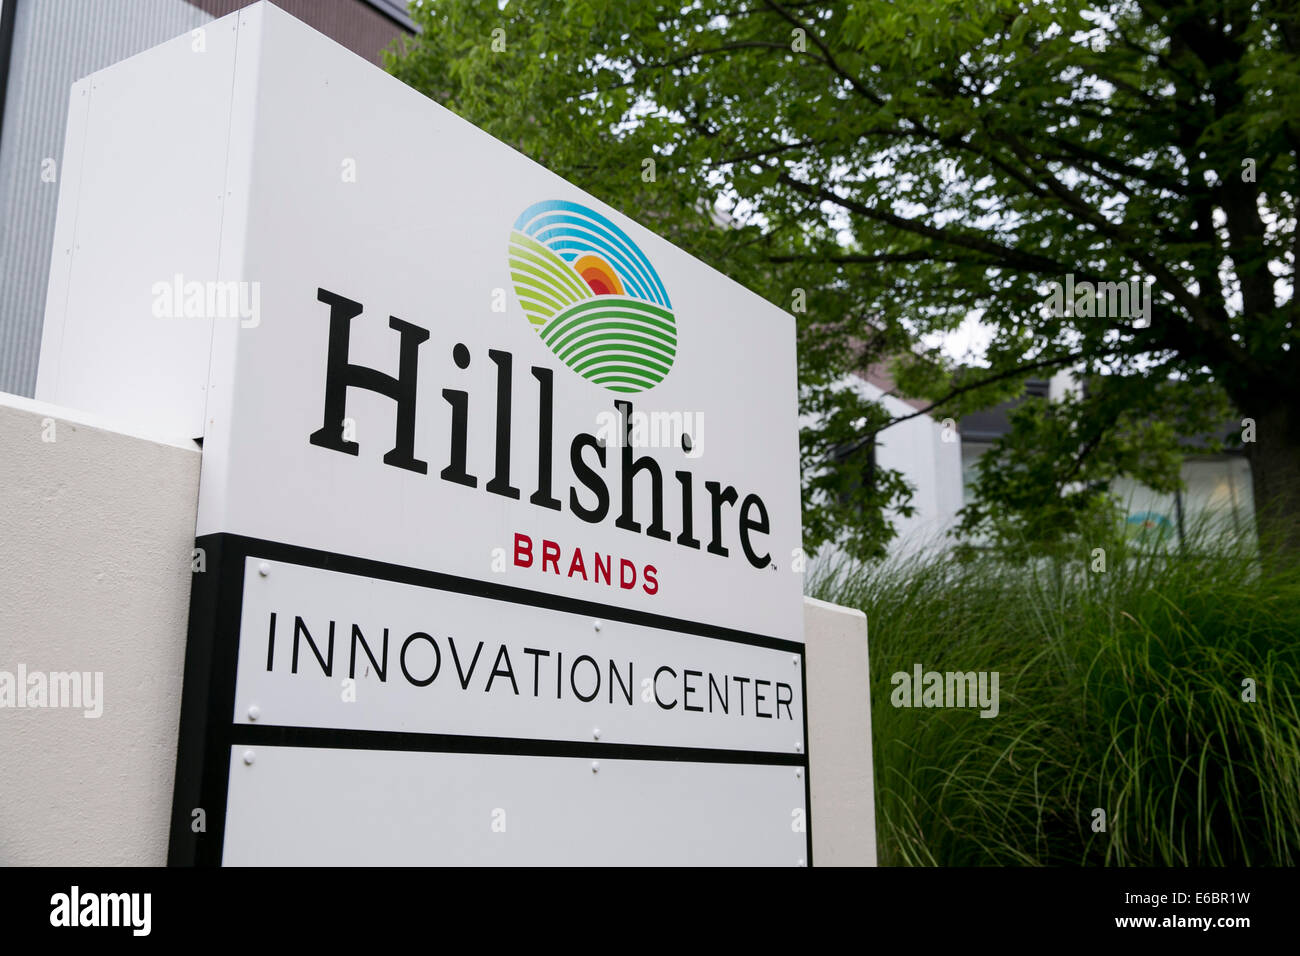 The Hillshire Brands Innovation Center in Downers Grove, Illinois. Stock Photo